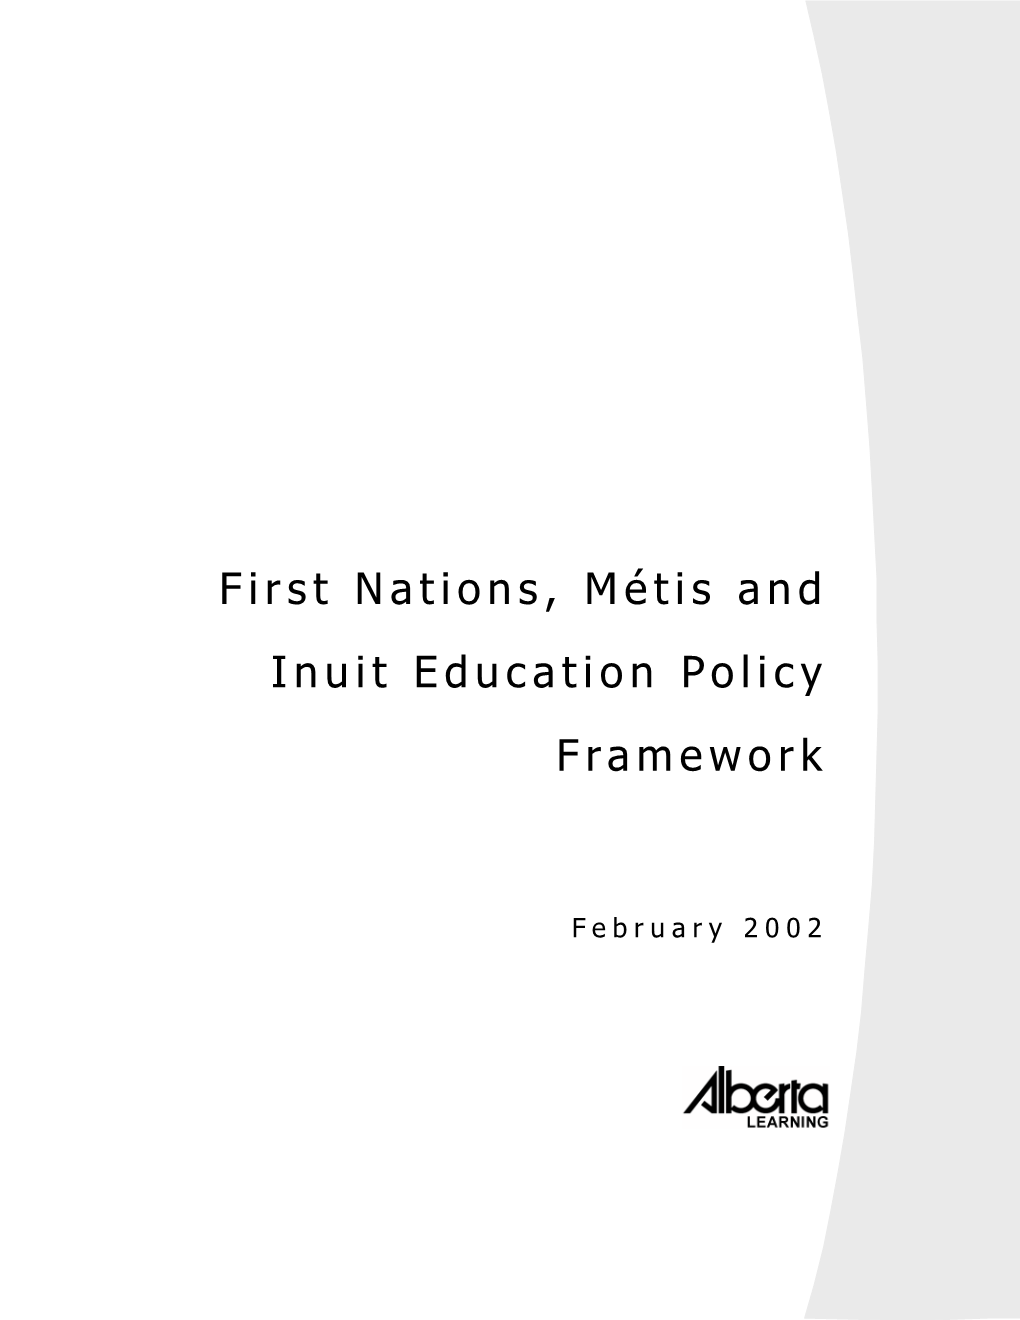 First Nations, Métis and Inuit Education Policy Framework